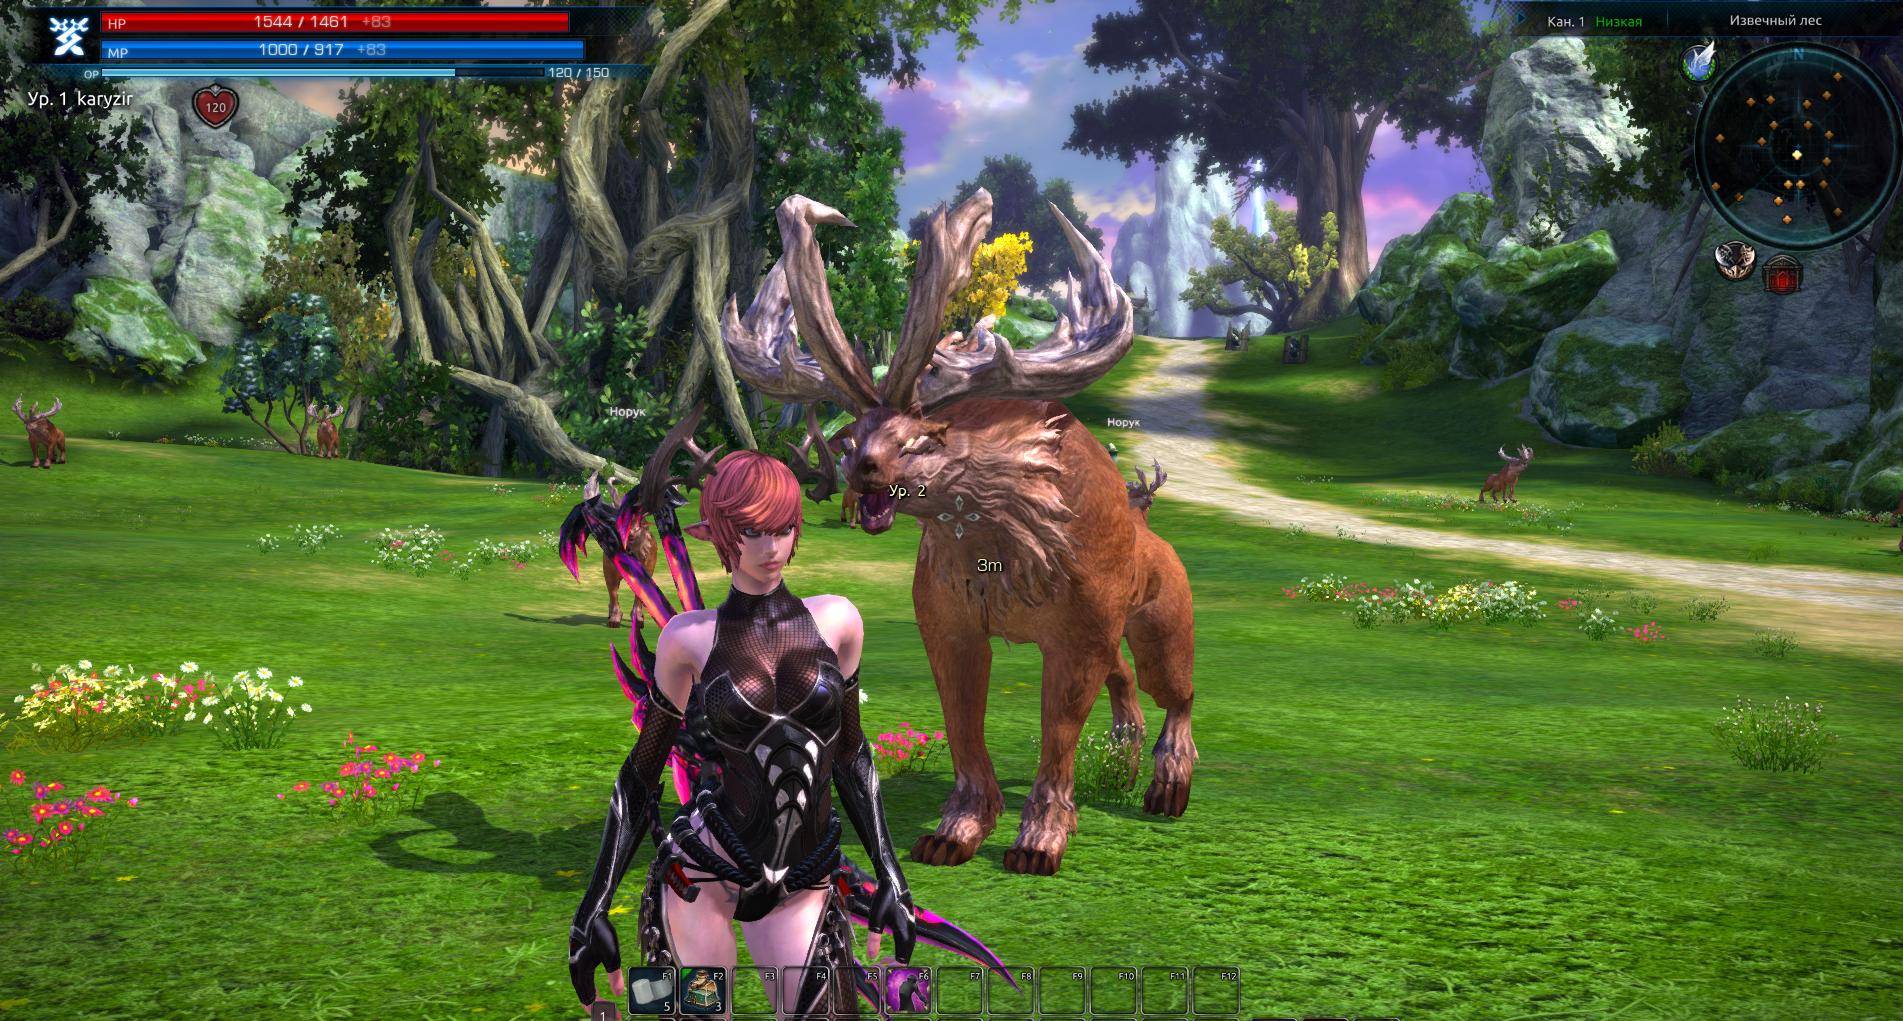 Ns8bts3 - (Tera Project) Tera Emulator by P5yl0 Update 140315 - RaGEZONE Forums